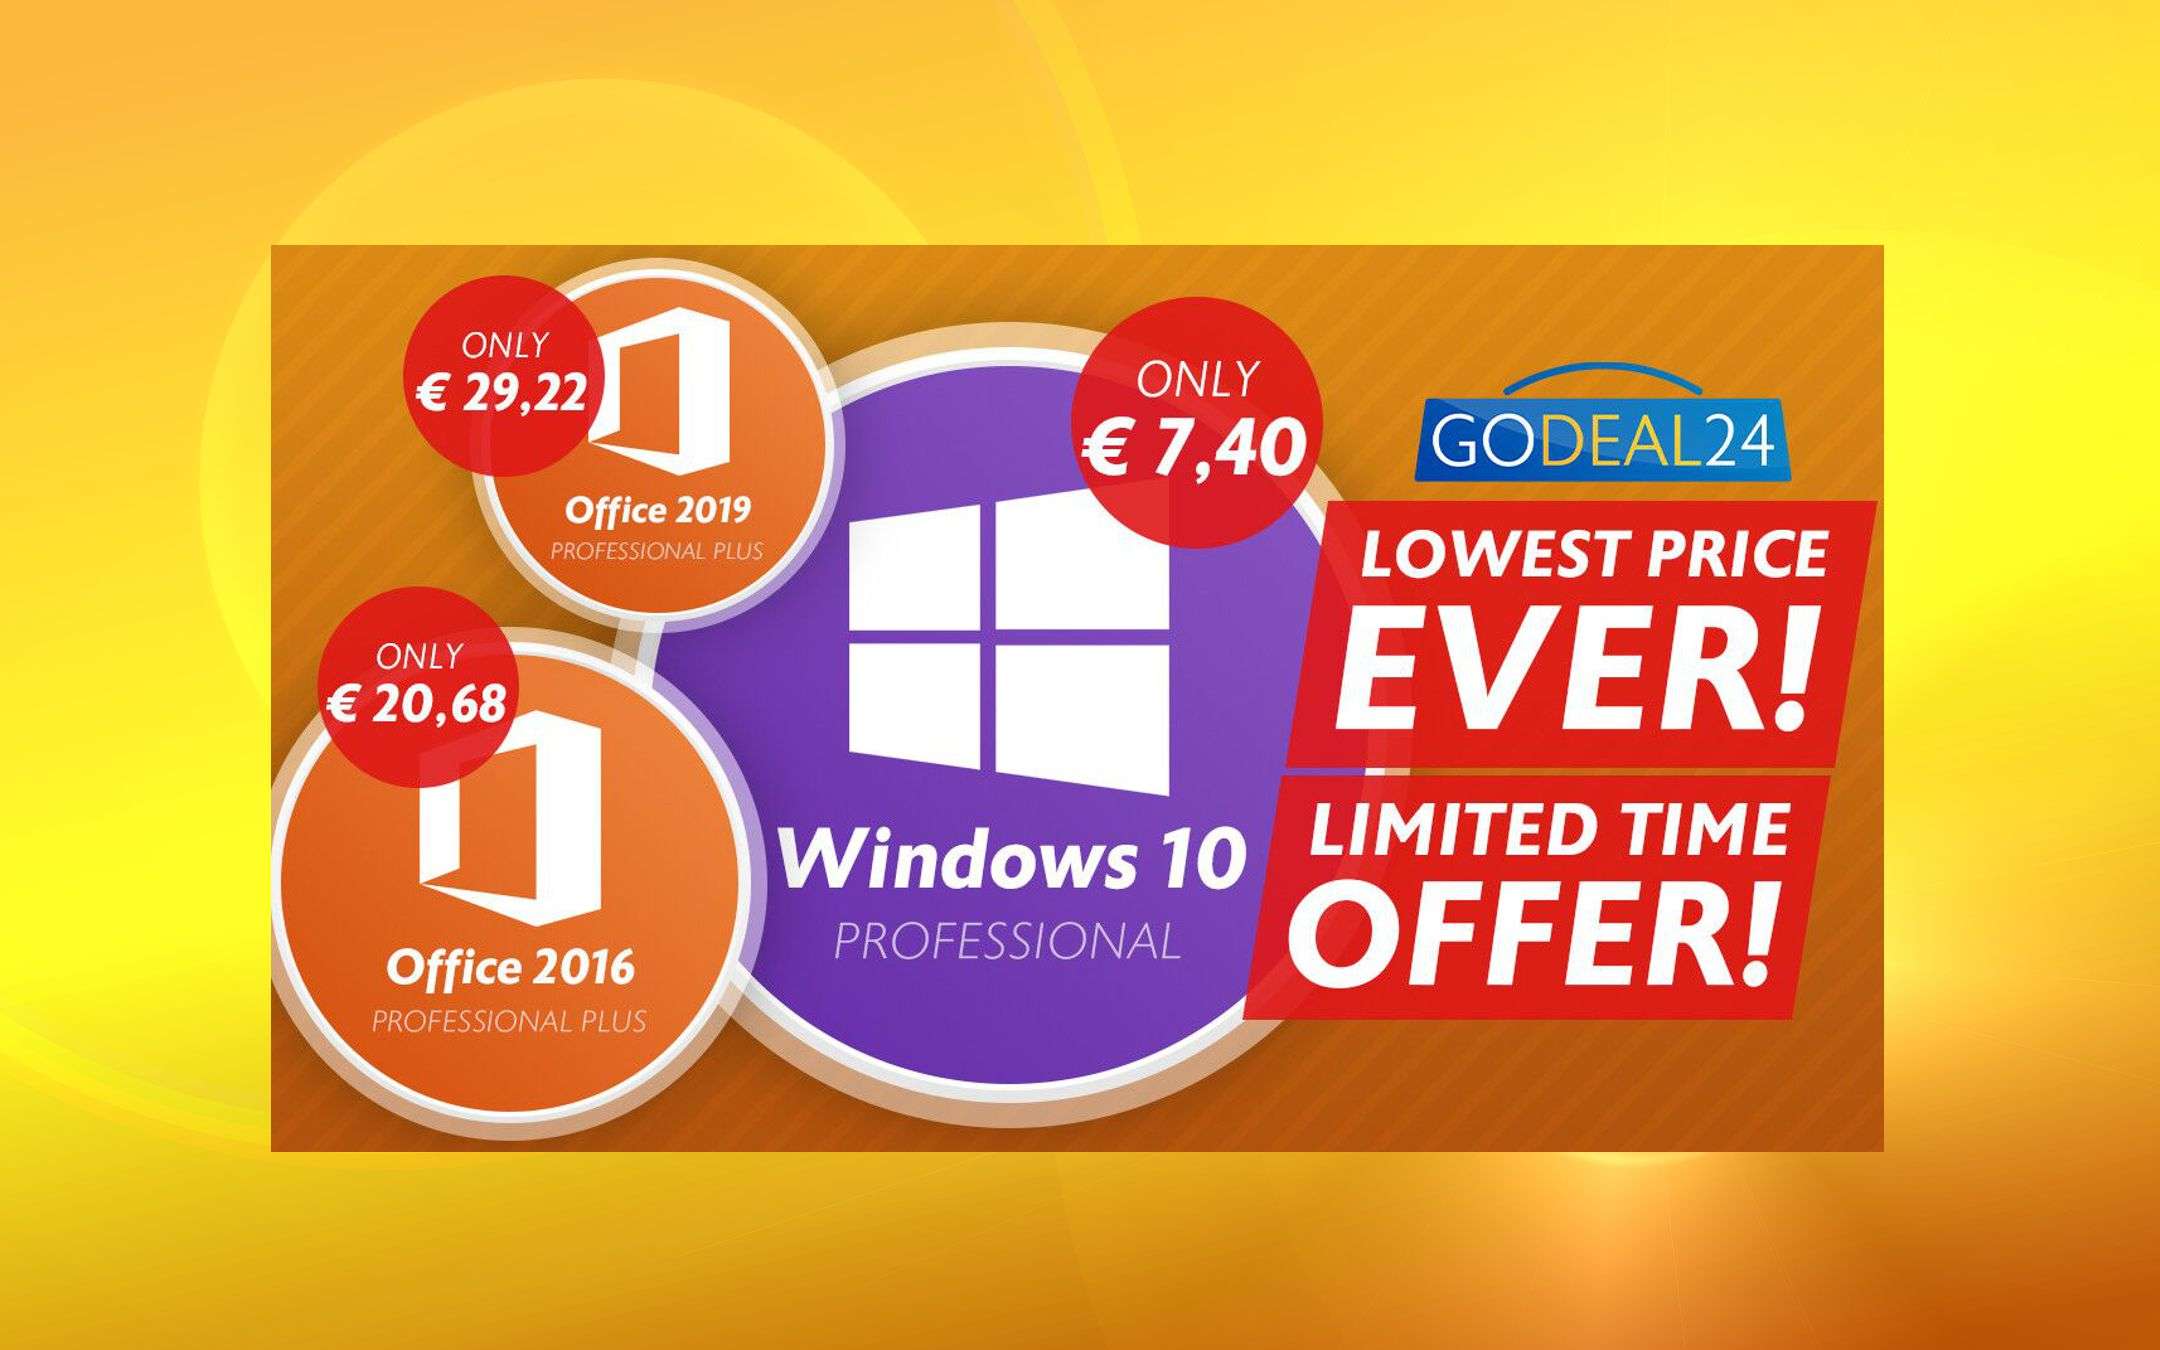 Windows 10 for less than € 7.40 with GoDeal24